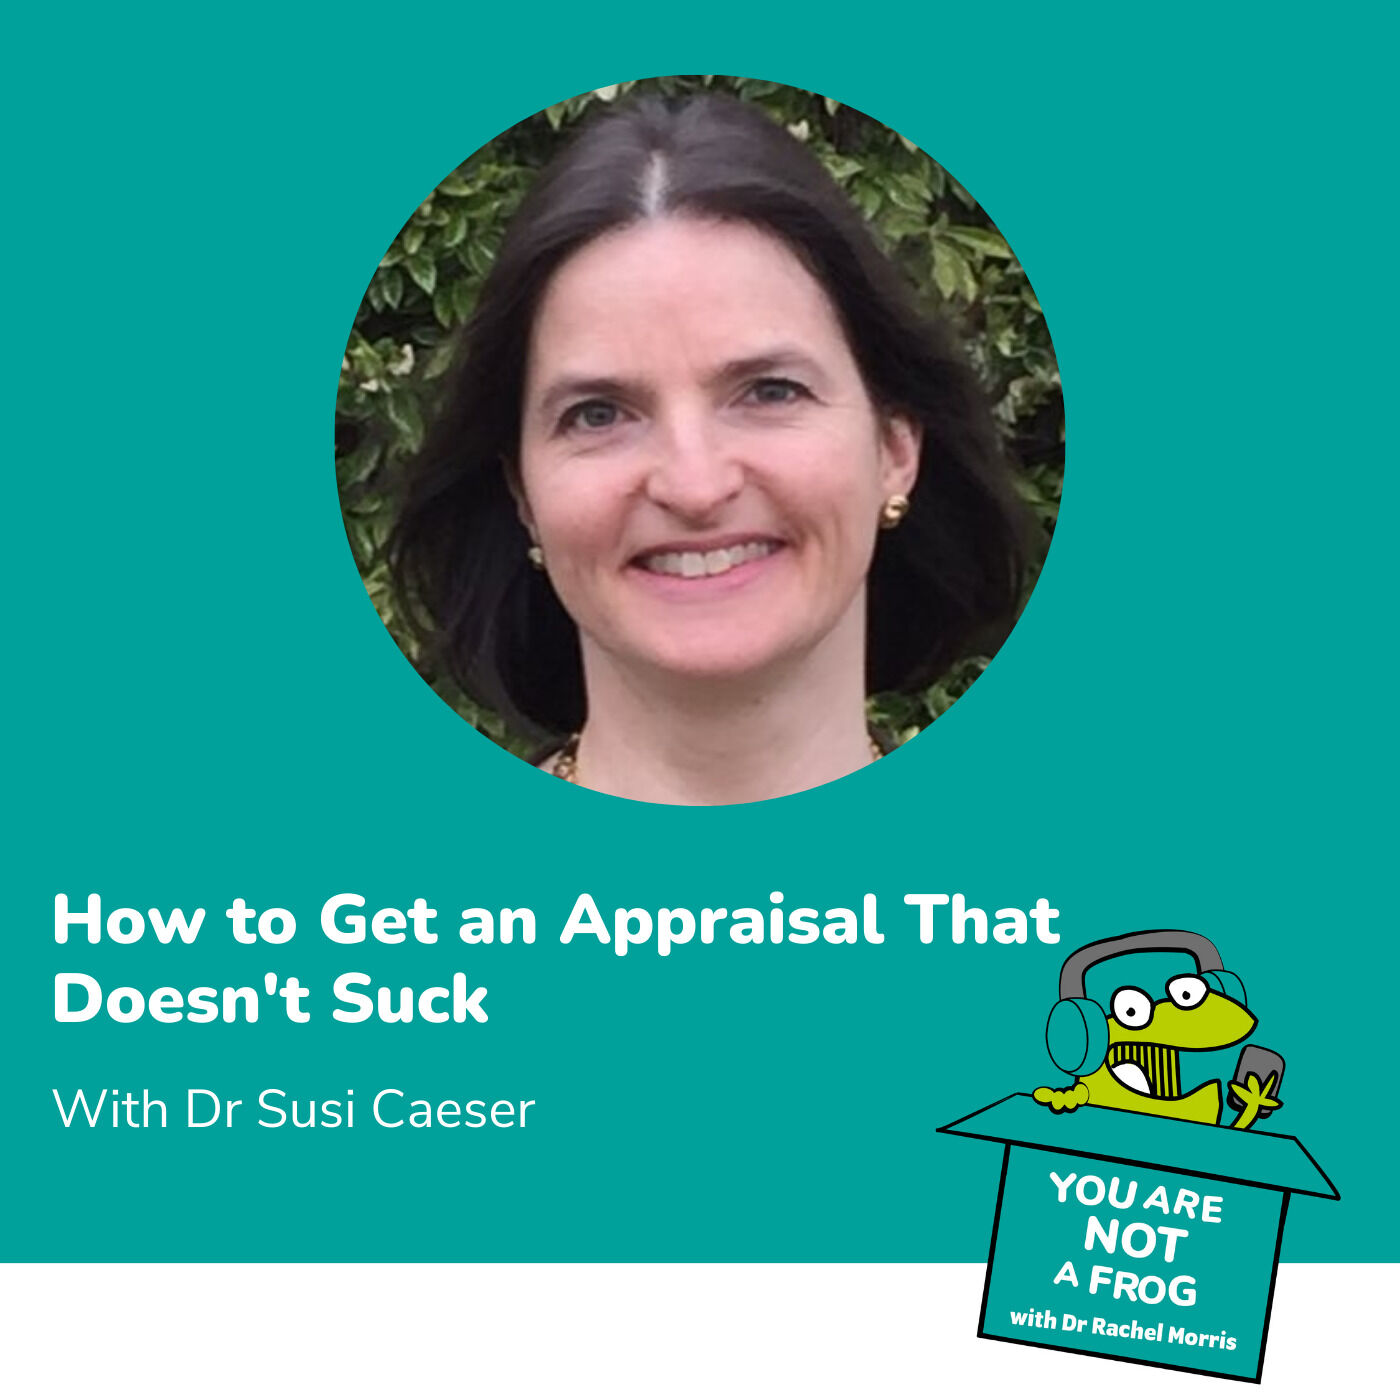 How to Get an Appraisal That Doesn’t Suck